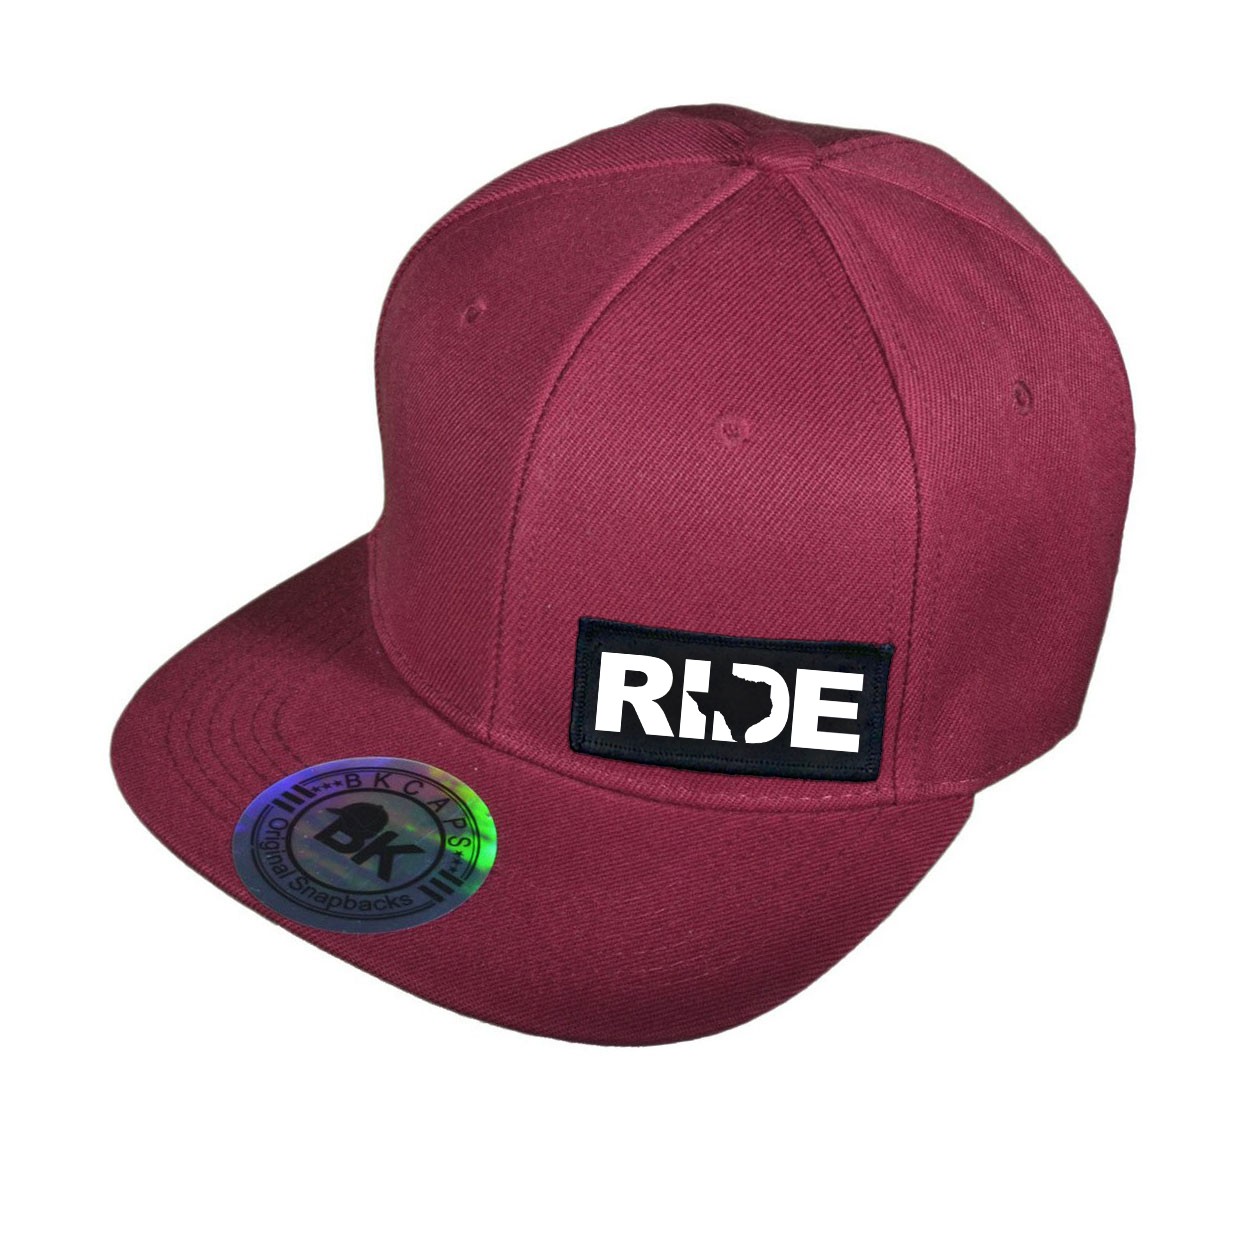 Ride Texas Night Out Woven Patch Snapback Flat Brim Hat Burgundy (White Logo)